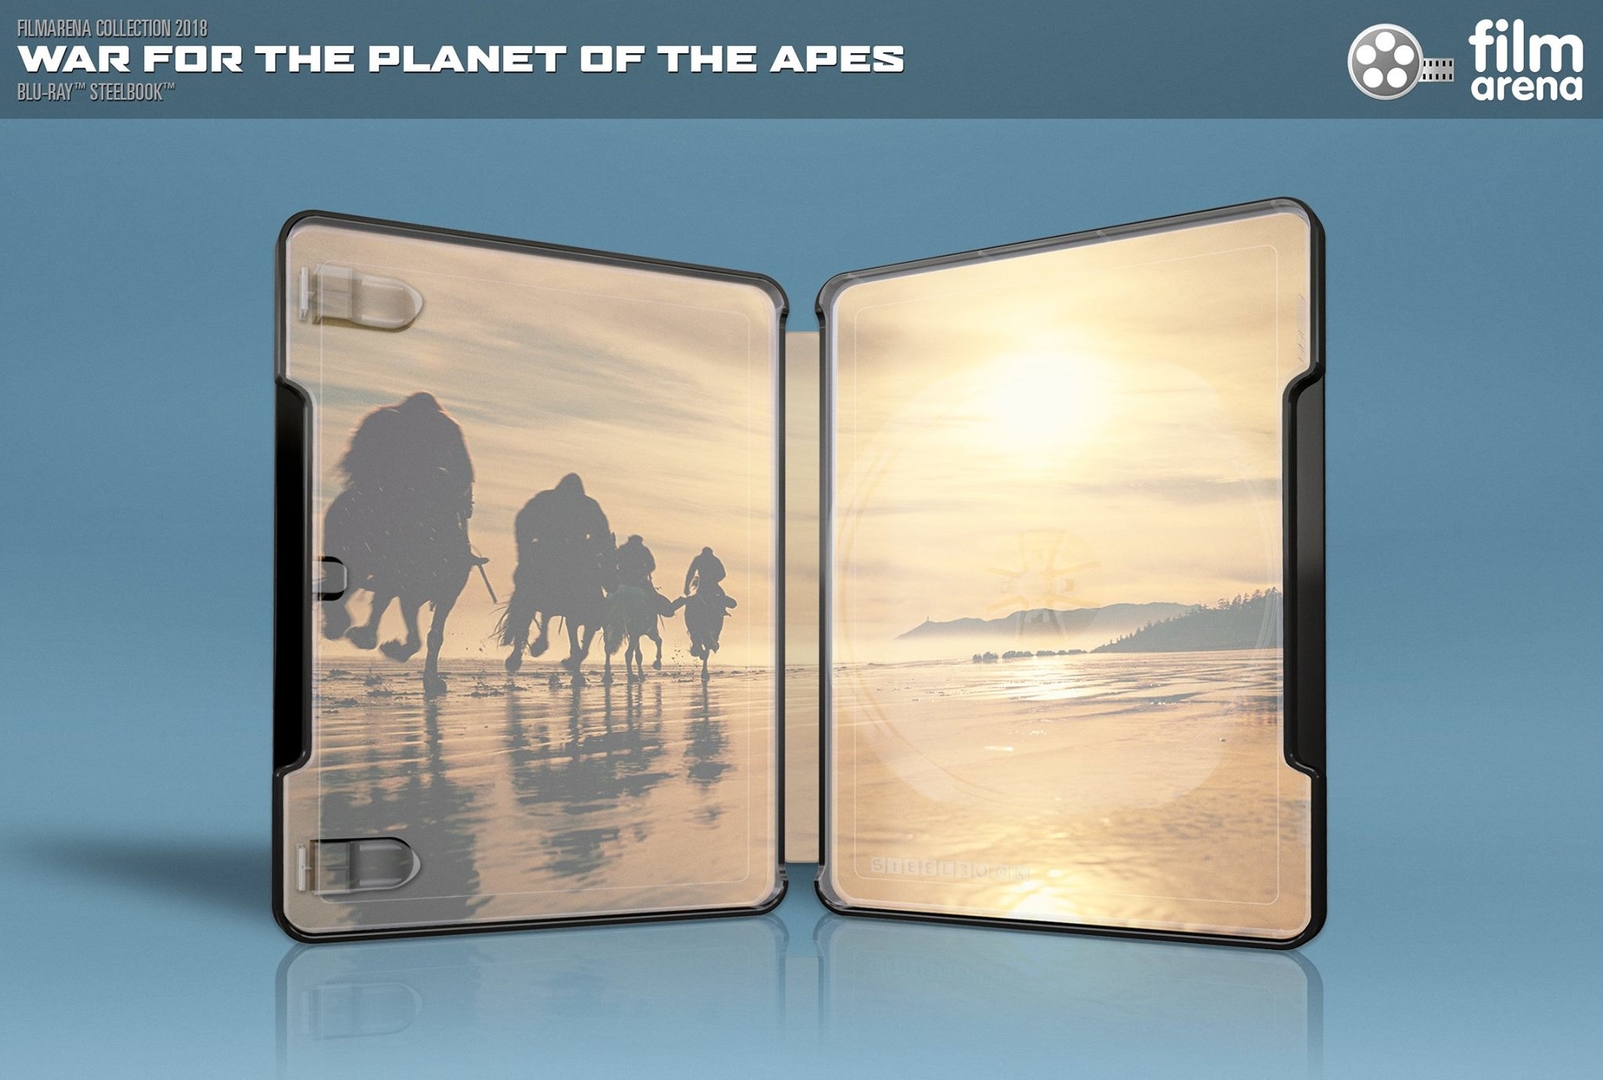 095_-_War_for_the_Planet_of_the_Apes_WEA_2_.jpg